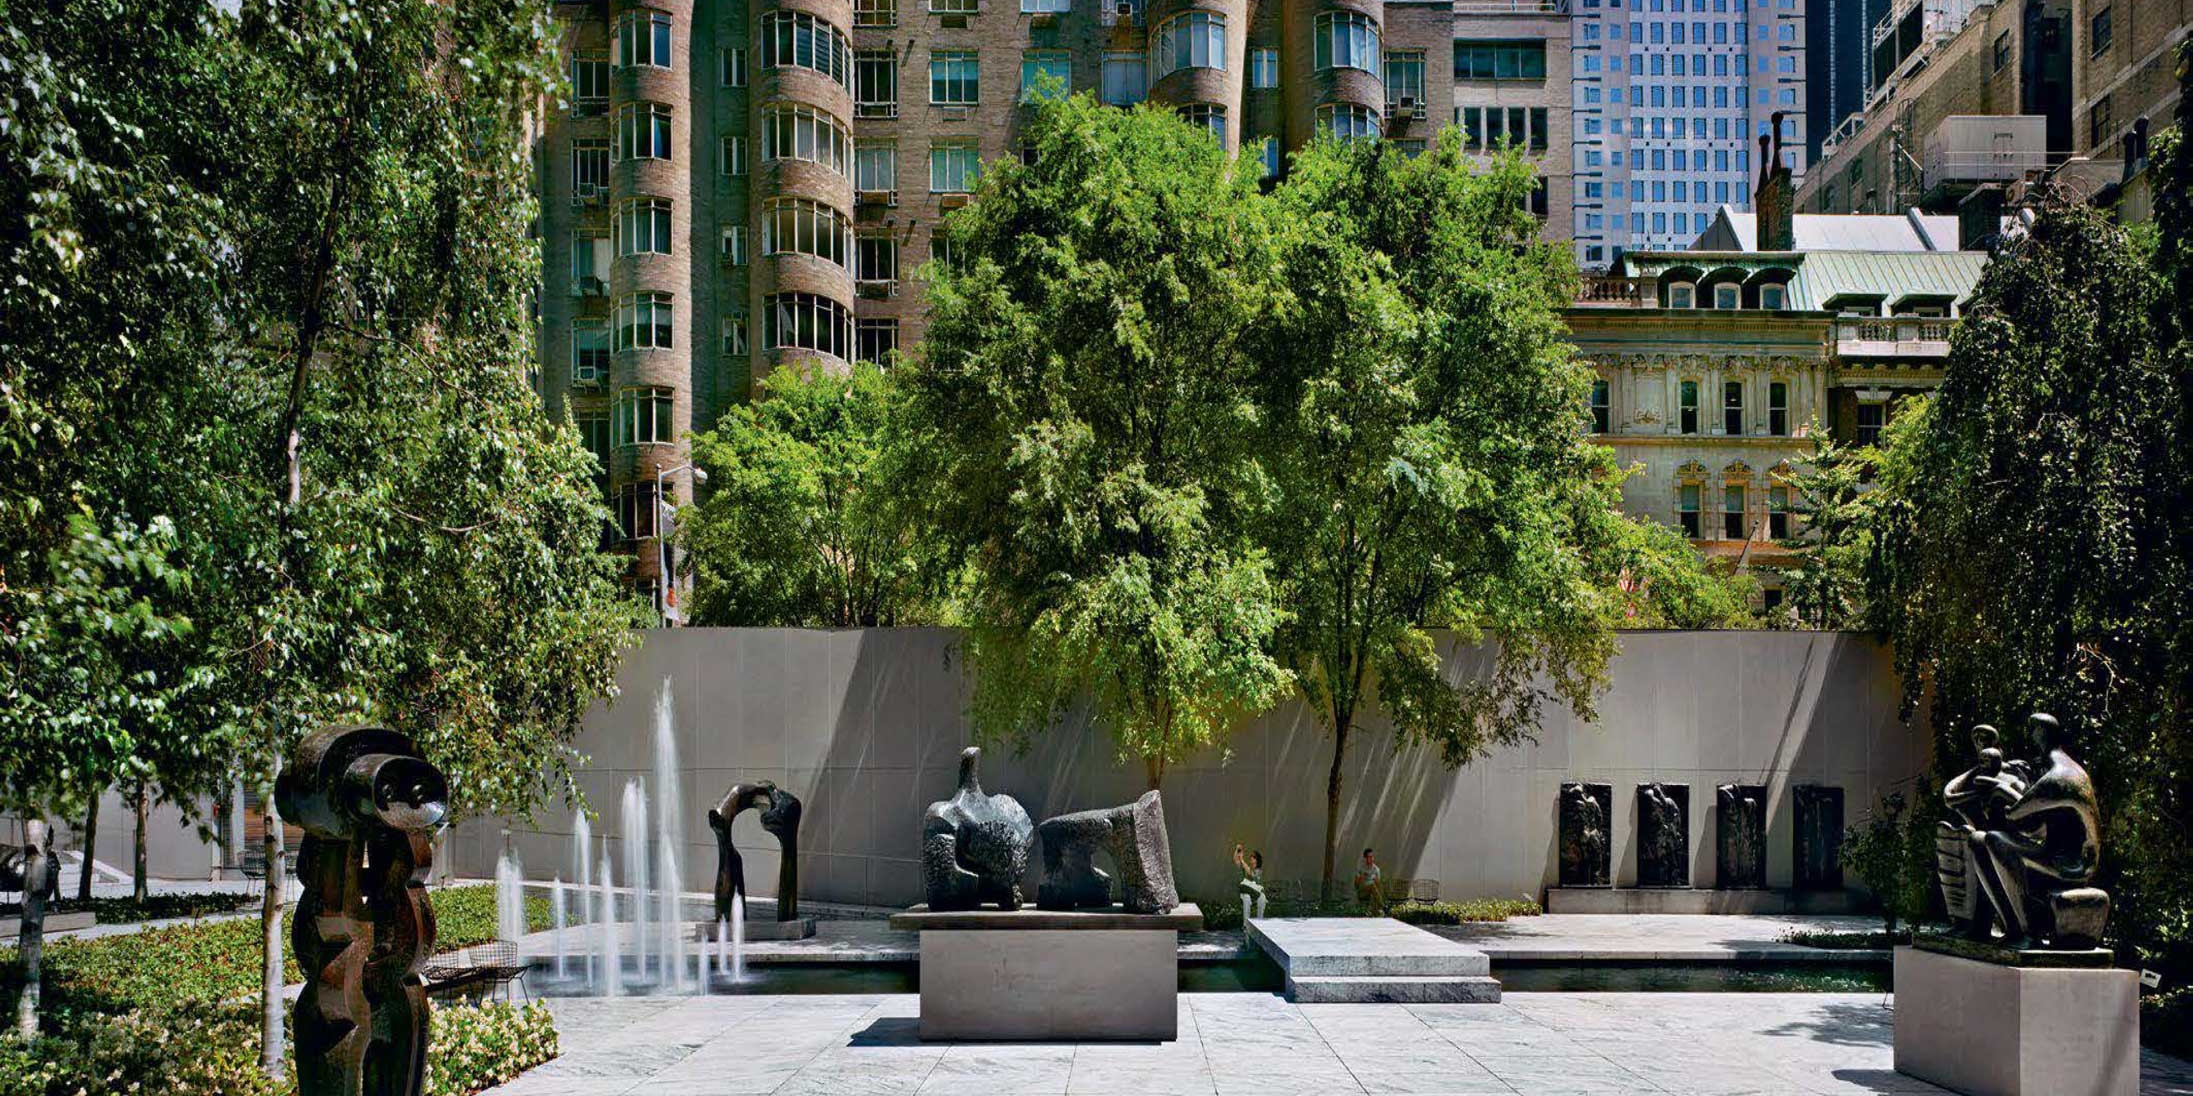 Standout Moments from the Reinstallation of MoMA’s Sculpture Garden